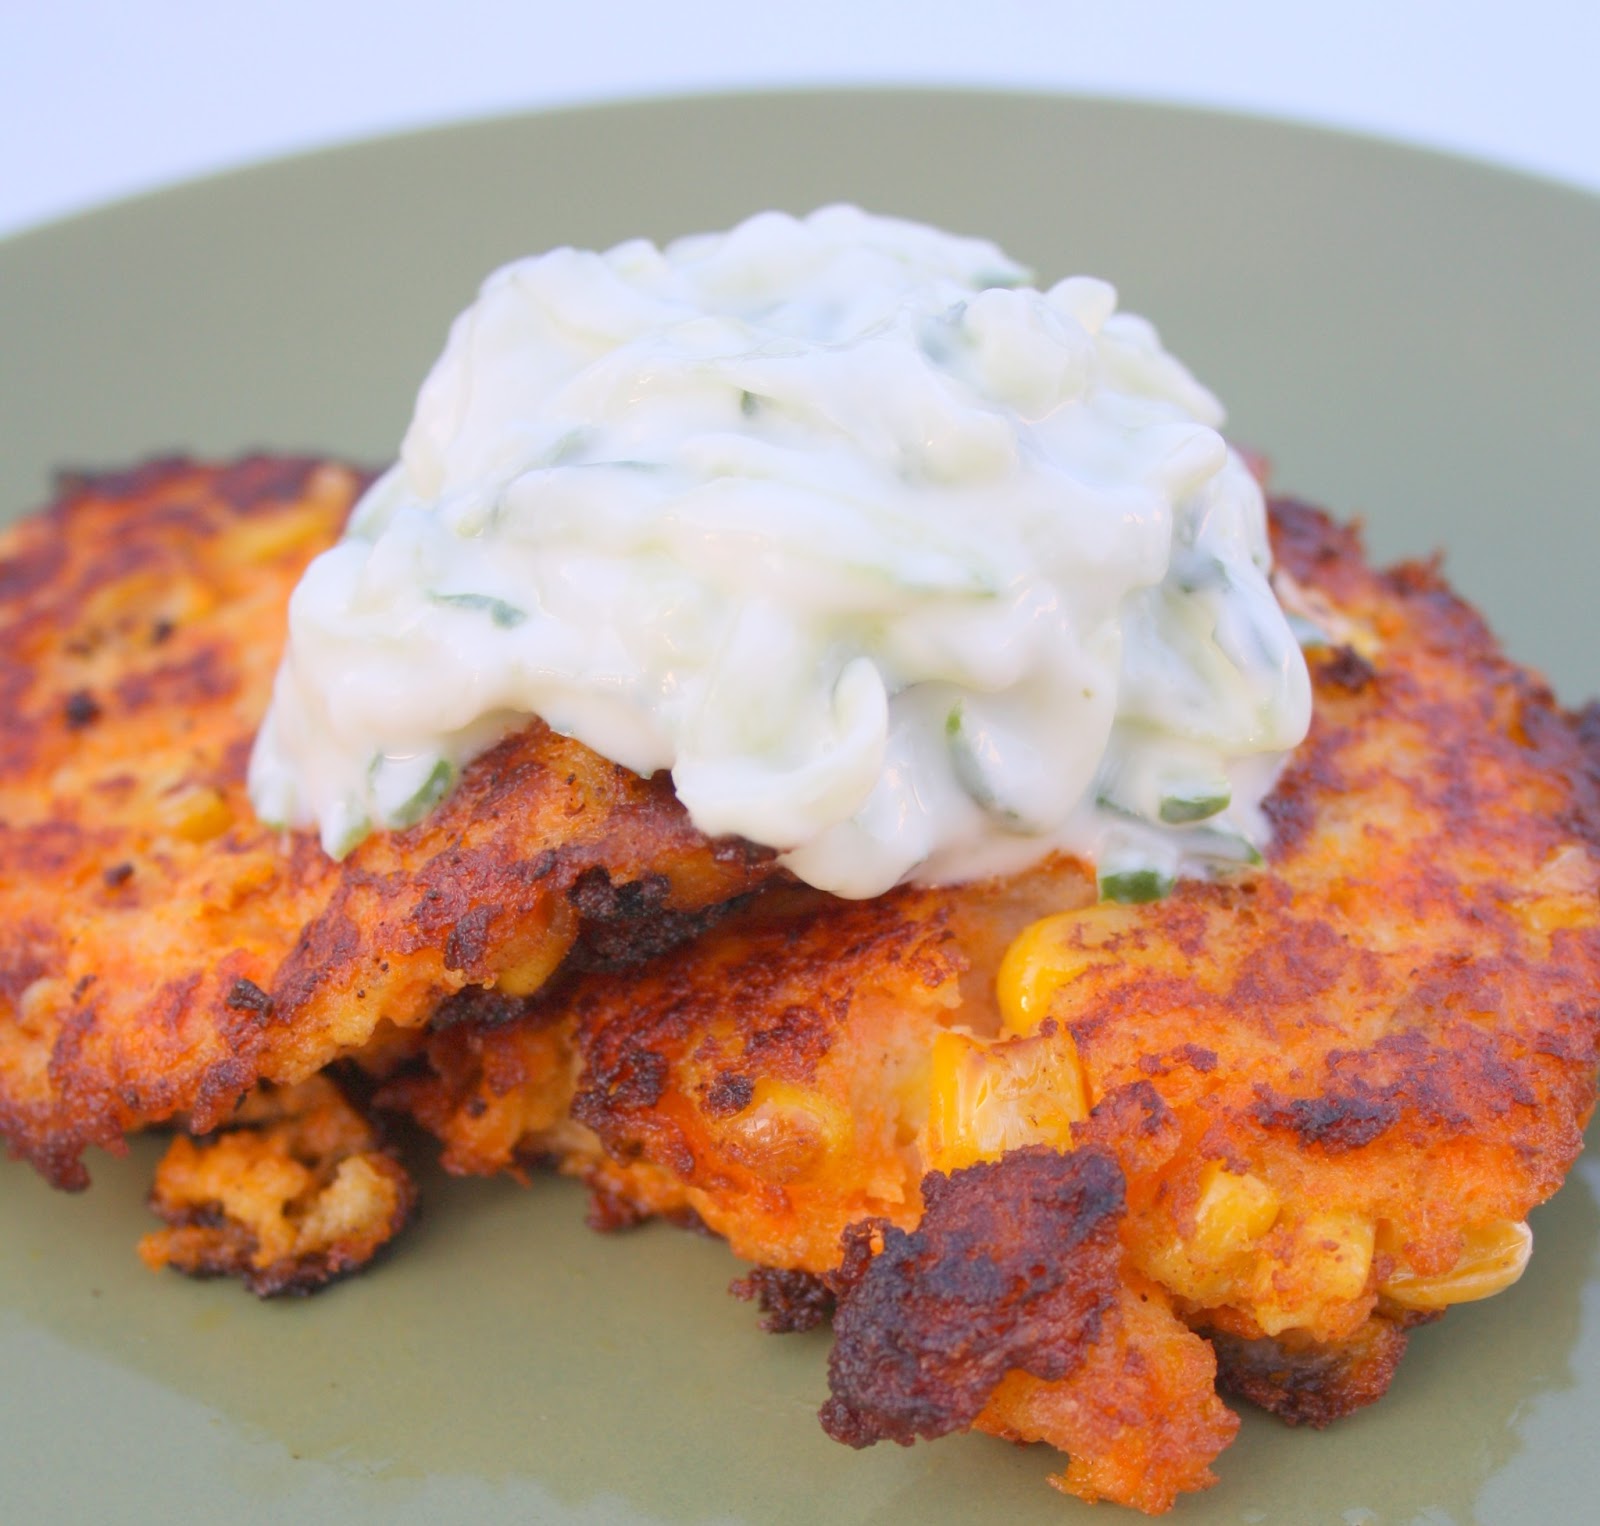 Homemade Heaven......: Carrot and Corn Fritters